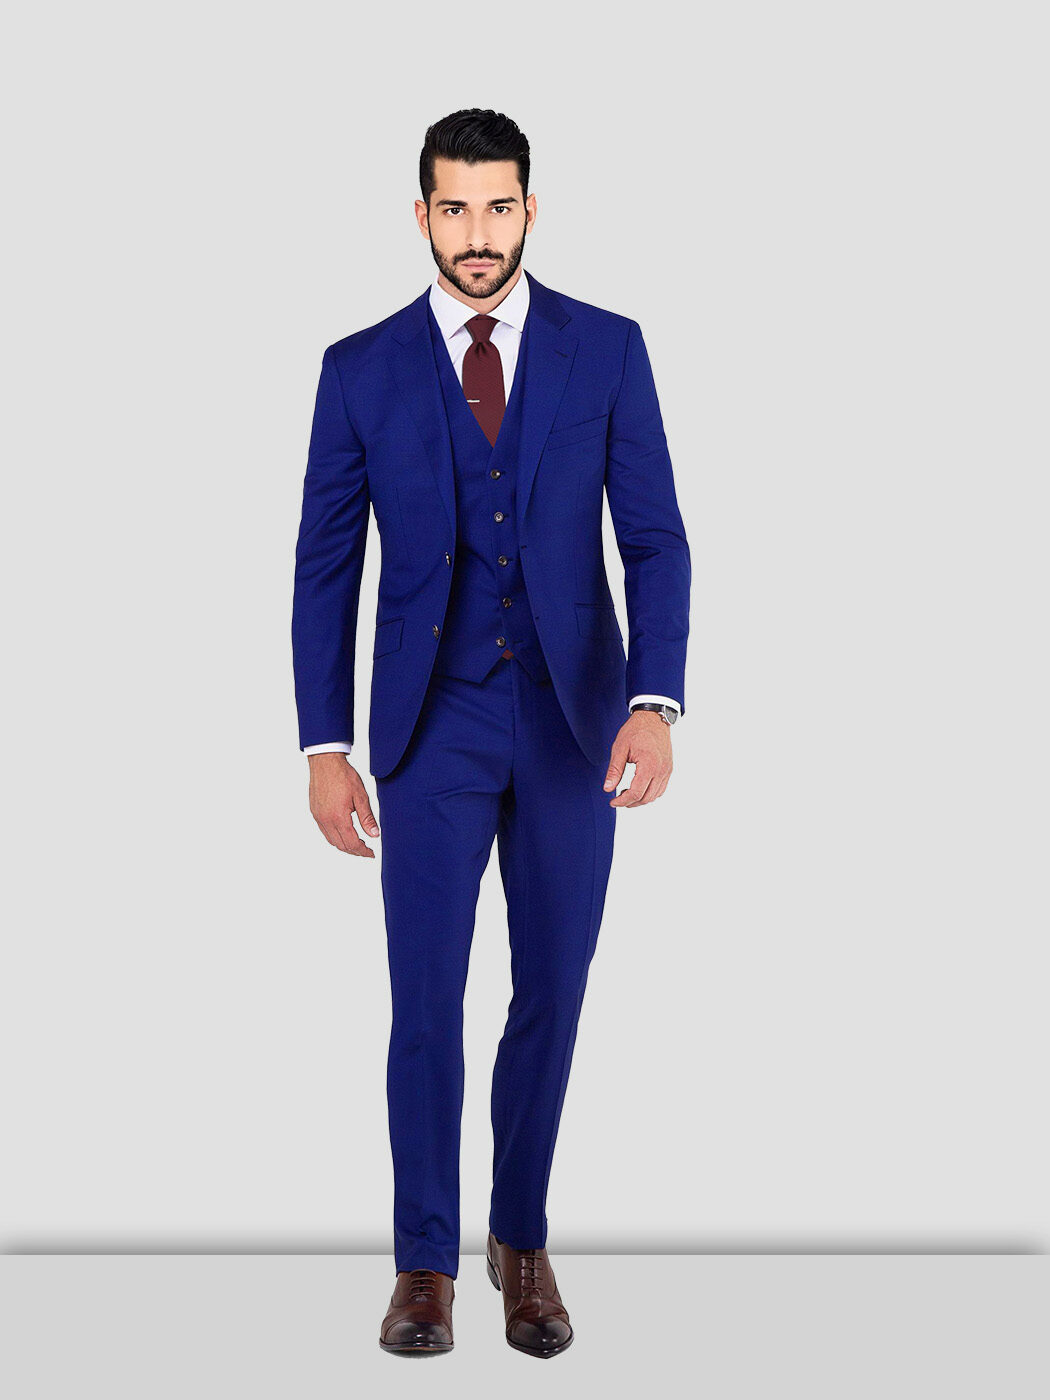 Discover more than 241 gents suit dress latest